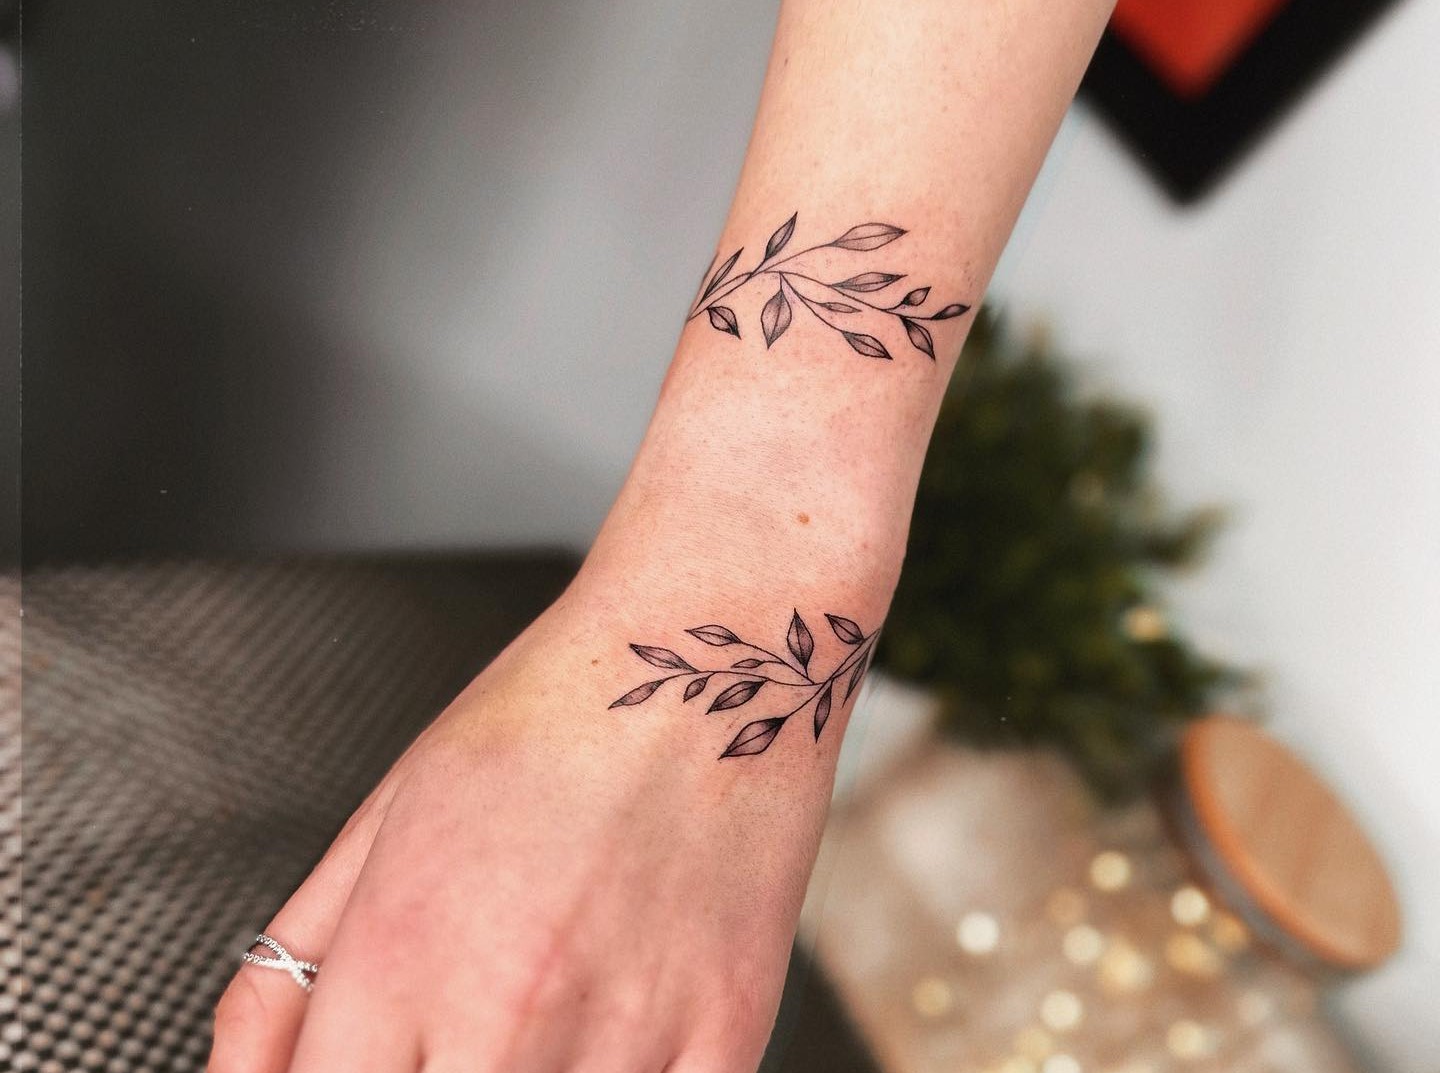 Kelsea Ballerini's Tattoos and Their Meanings | POPSUGAR Beauty